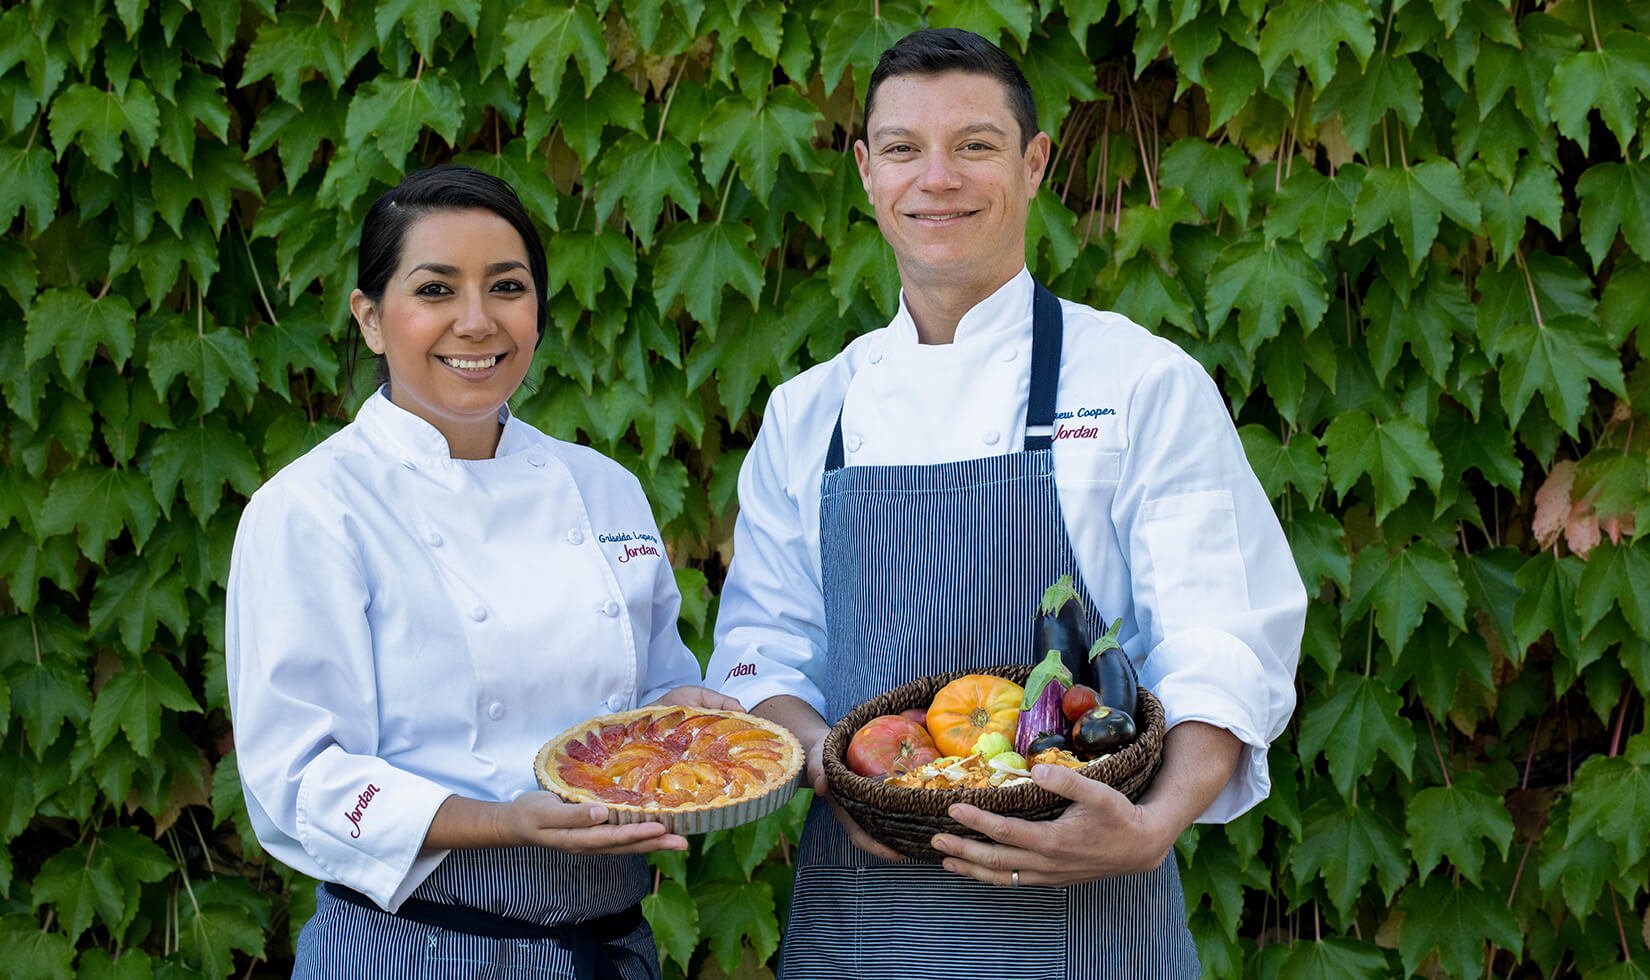 New cooks, Andrew Cooper and Griselda Lopez, pose outside of Jordan Winery's chateau